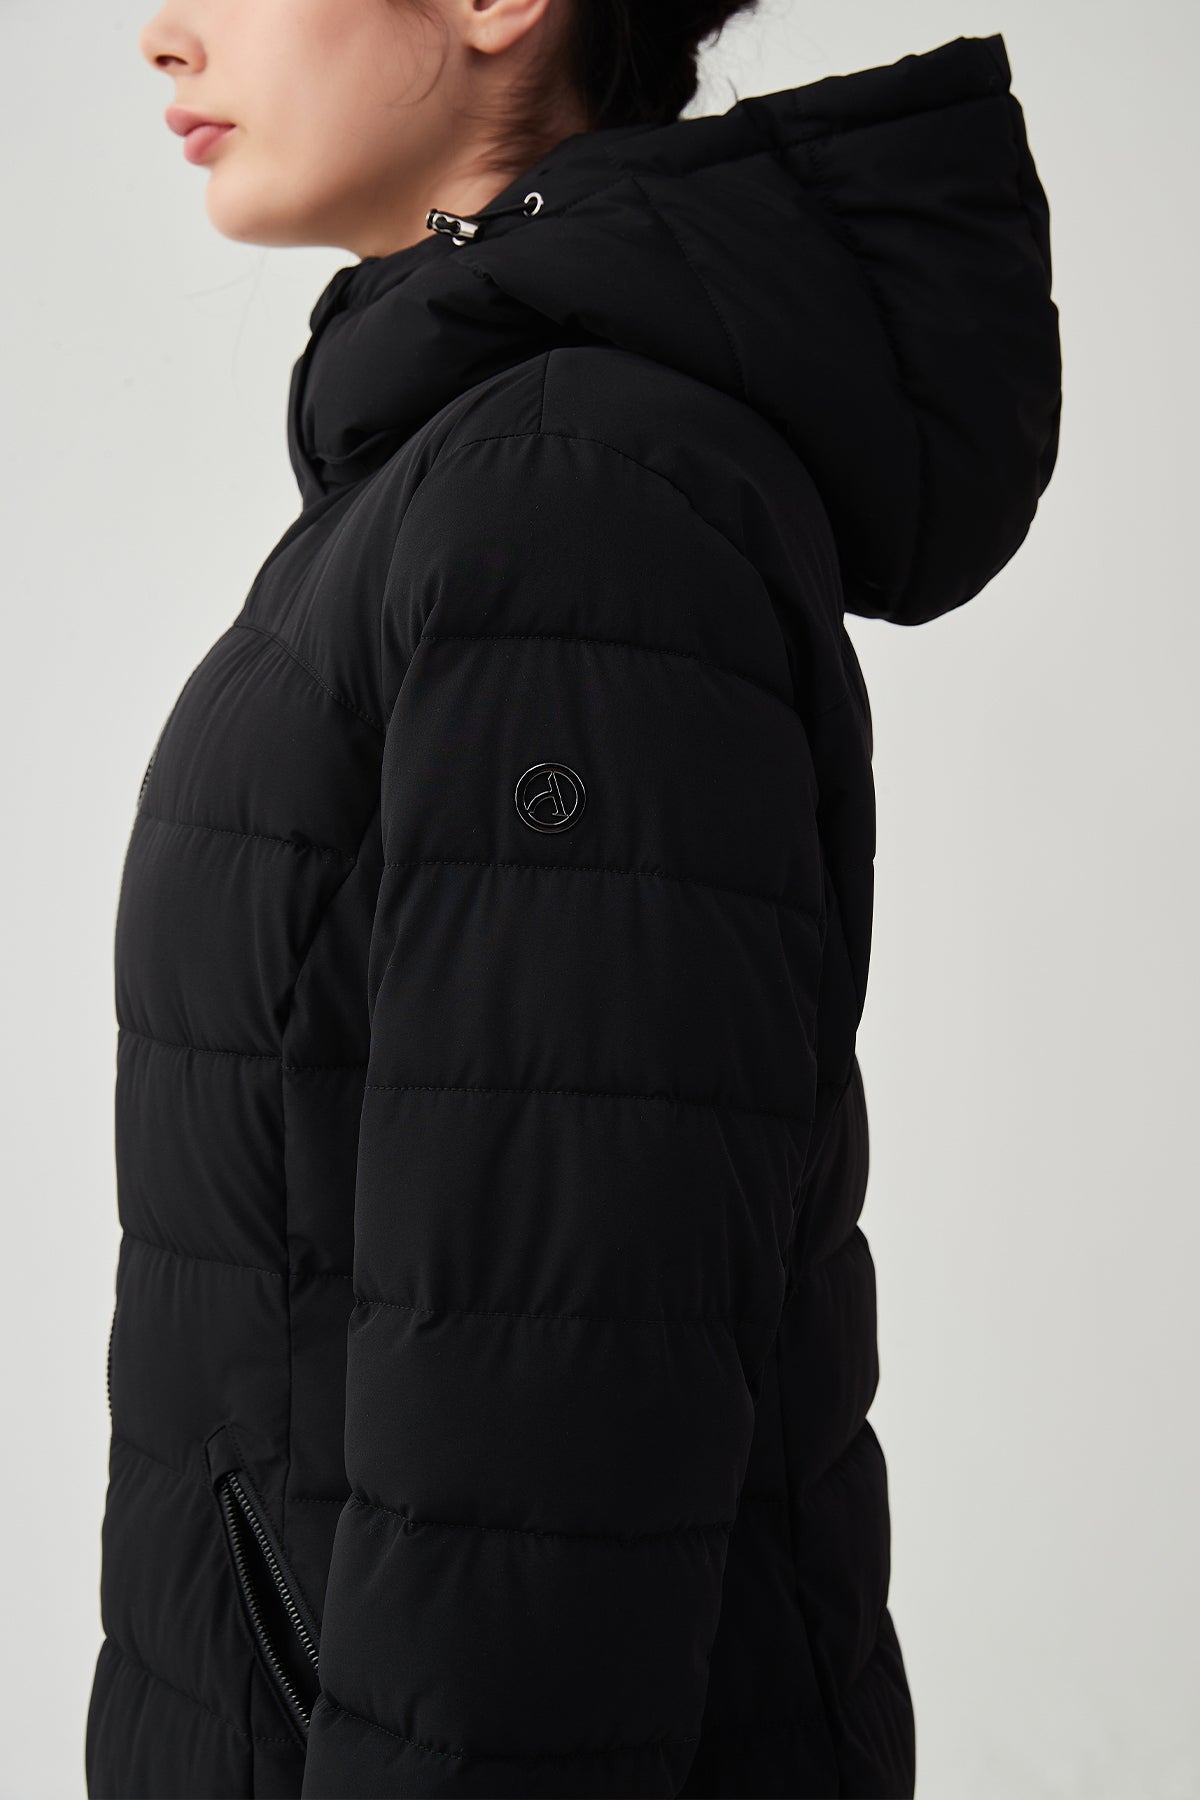 Kcocoo Womens Long Puffer Jacket Full Zip Quilted Packable Puffer Coat  Lightweight Coat With Hood Winter Jacket(Black,S) at  Women's Coats  Shop